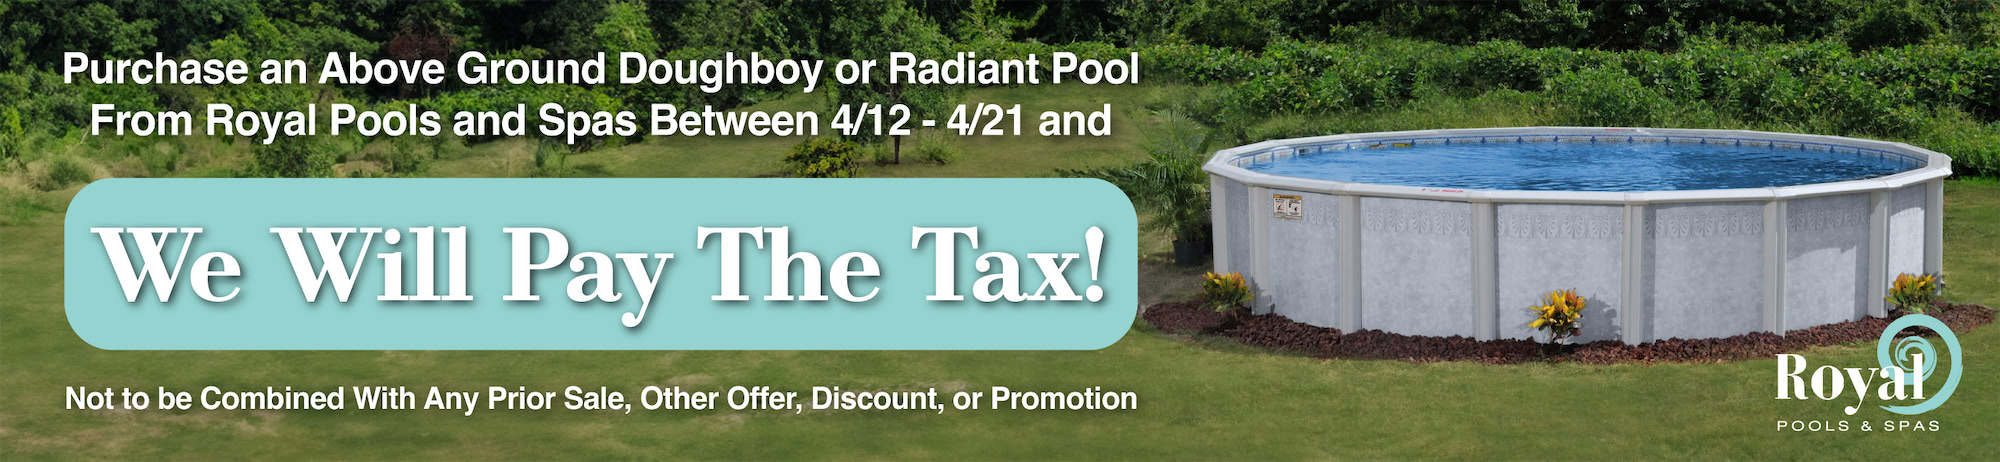 Tax Relief Promo for Pools!